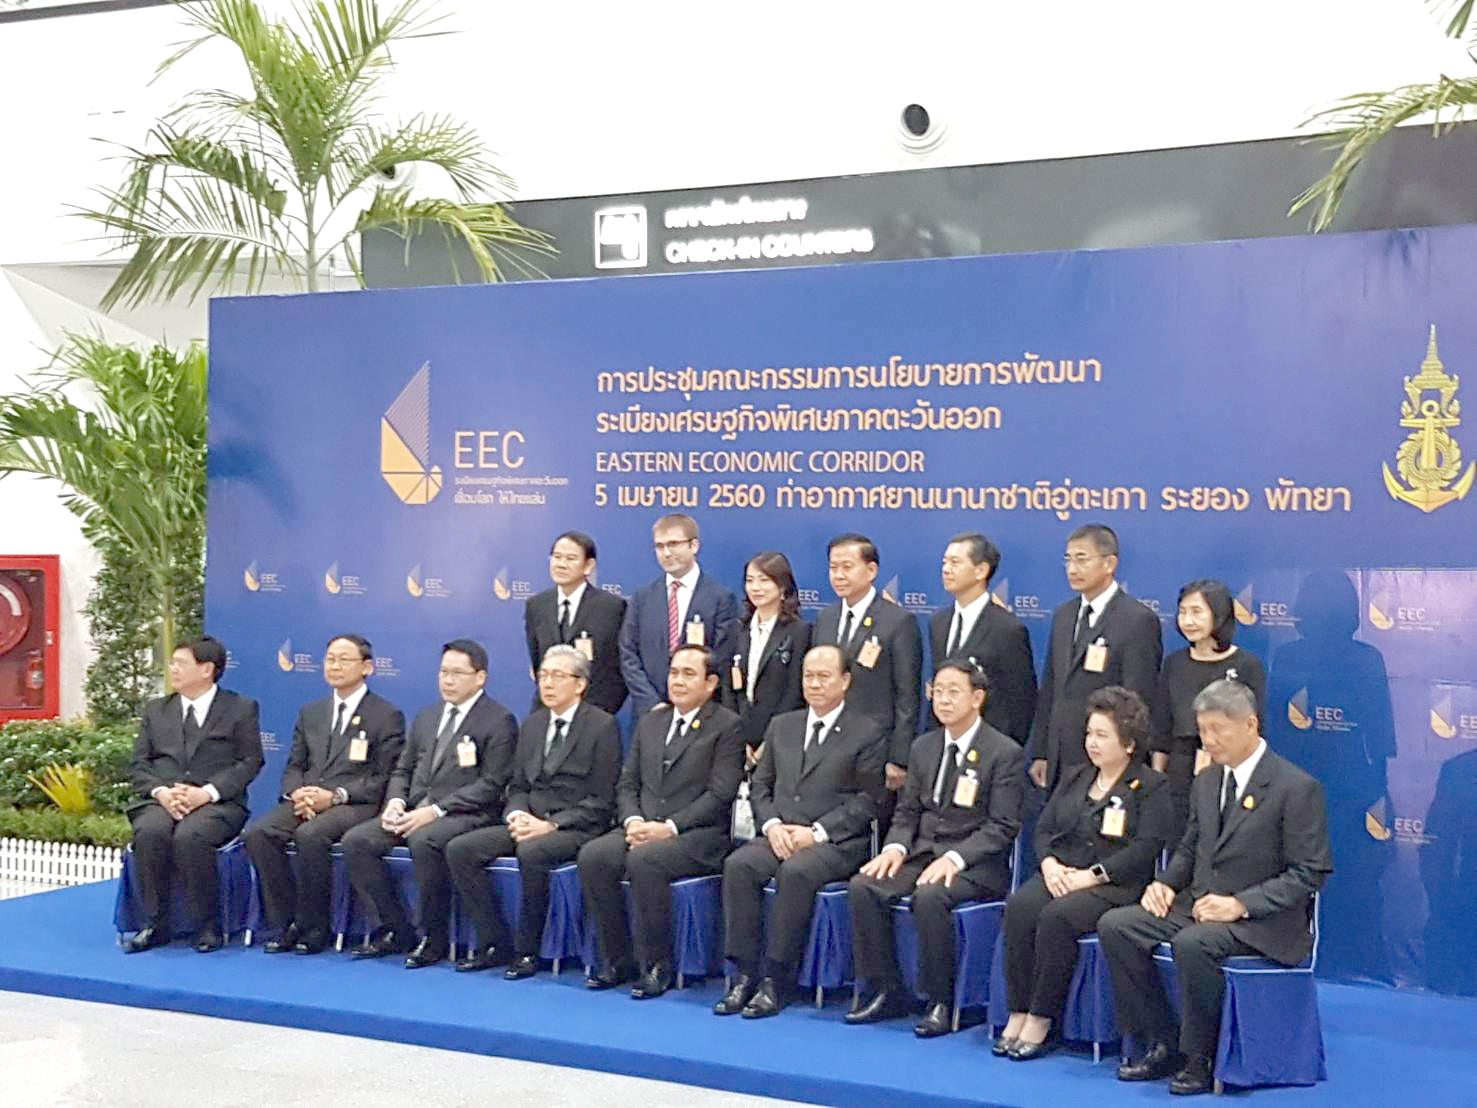 Prime Minister Prayut Chan-ocha met with over 20 senior executives of leading private companies who are interested in investing in the Eastern Economic Corridor.